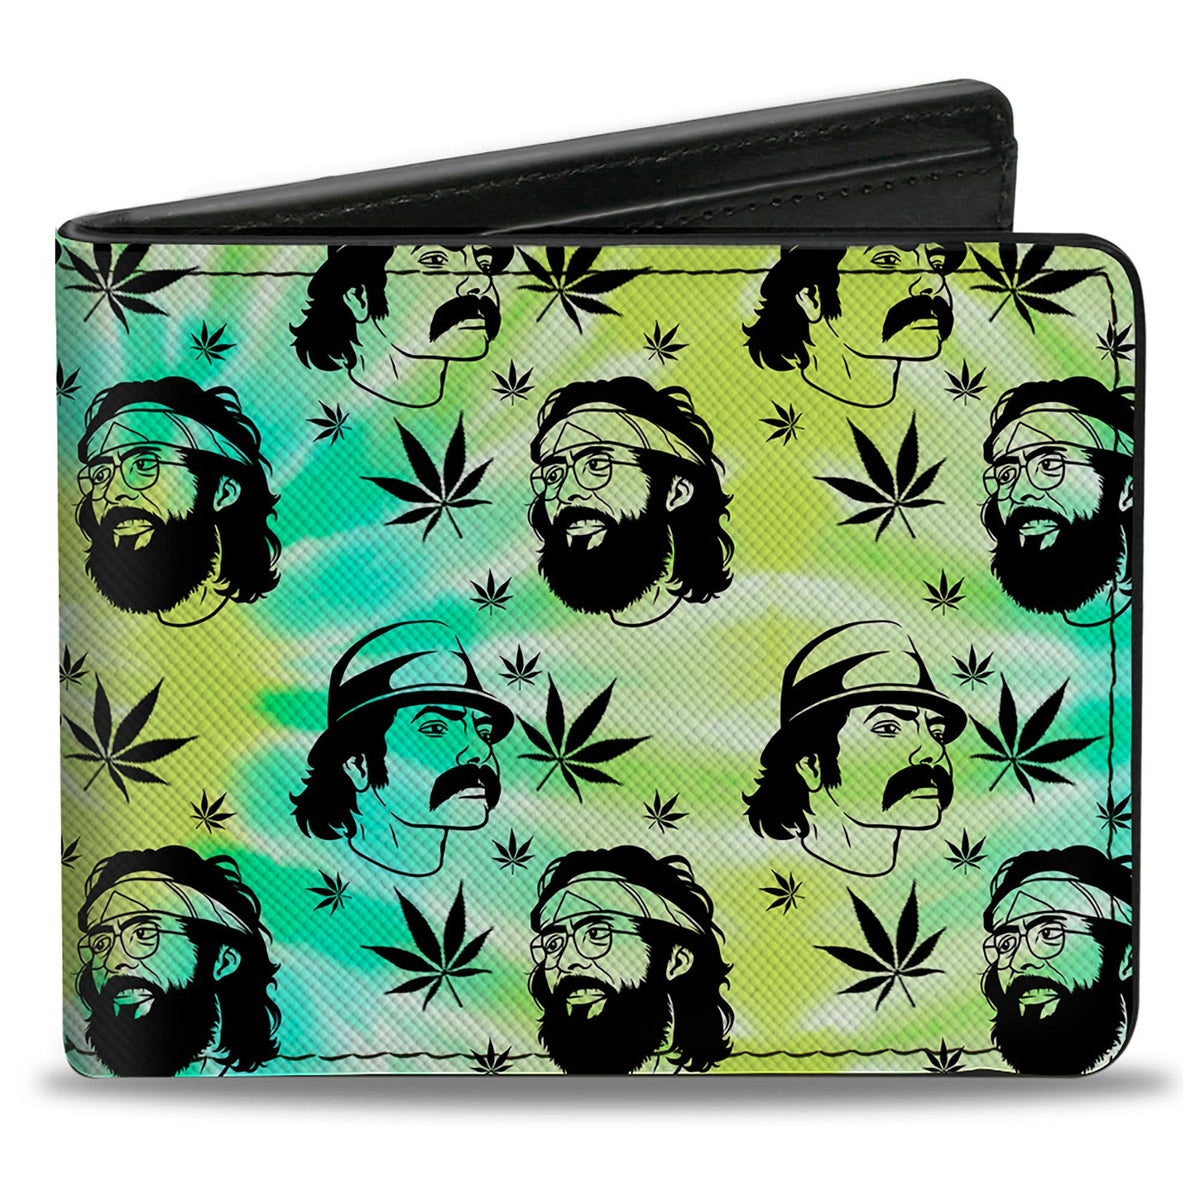 Bi-Fold Wallet - CHEECH &amp; CHONG Caricature Faces/Pot Leaves Scattered Tie Dye Greens/Black